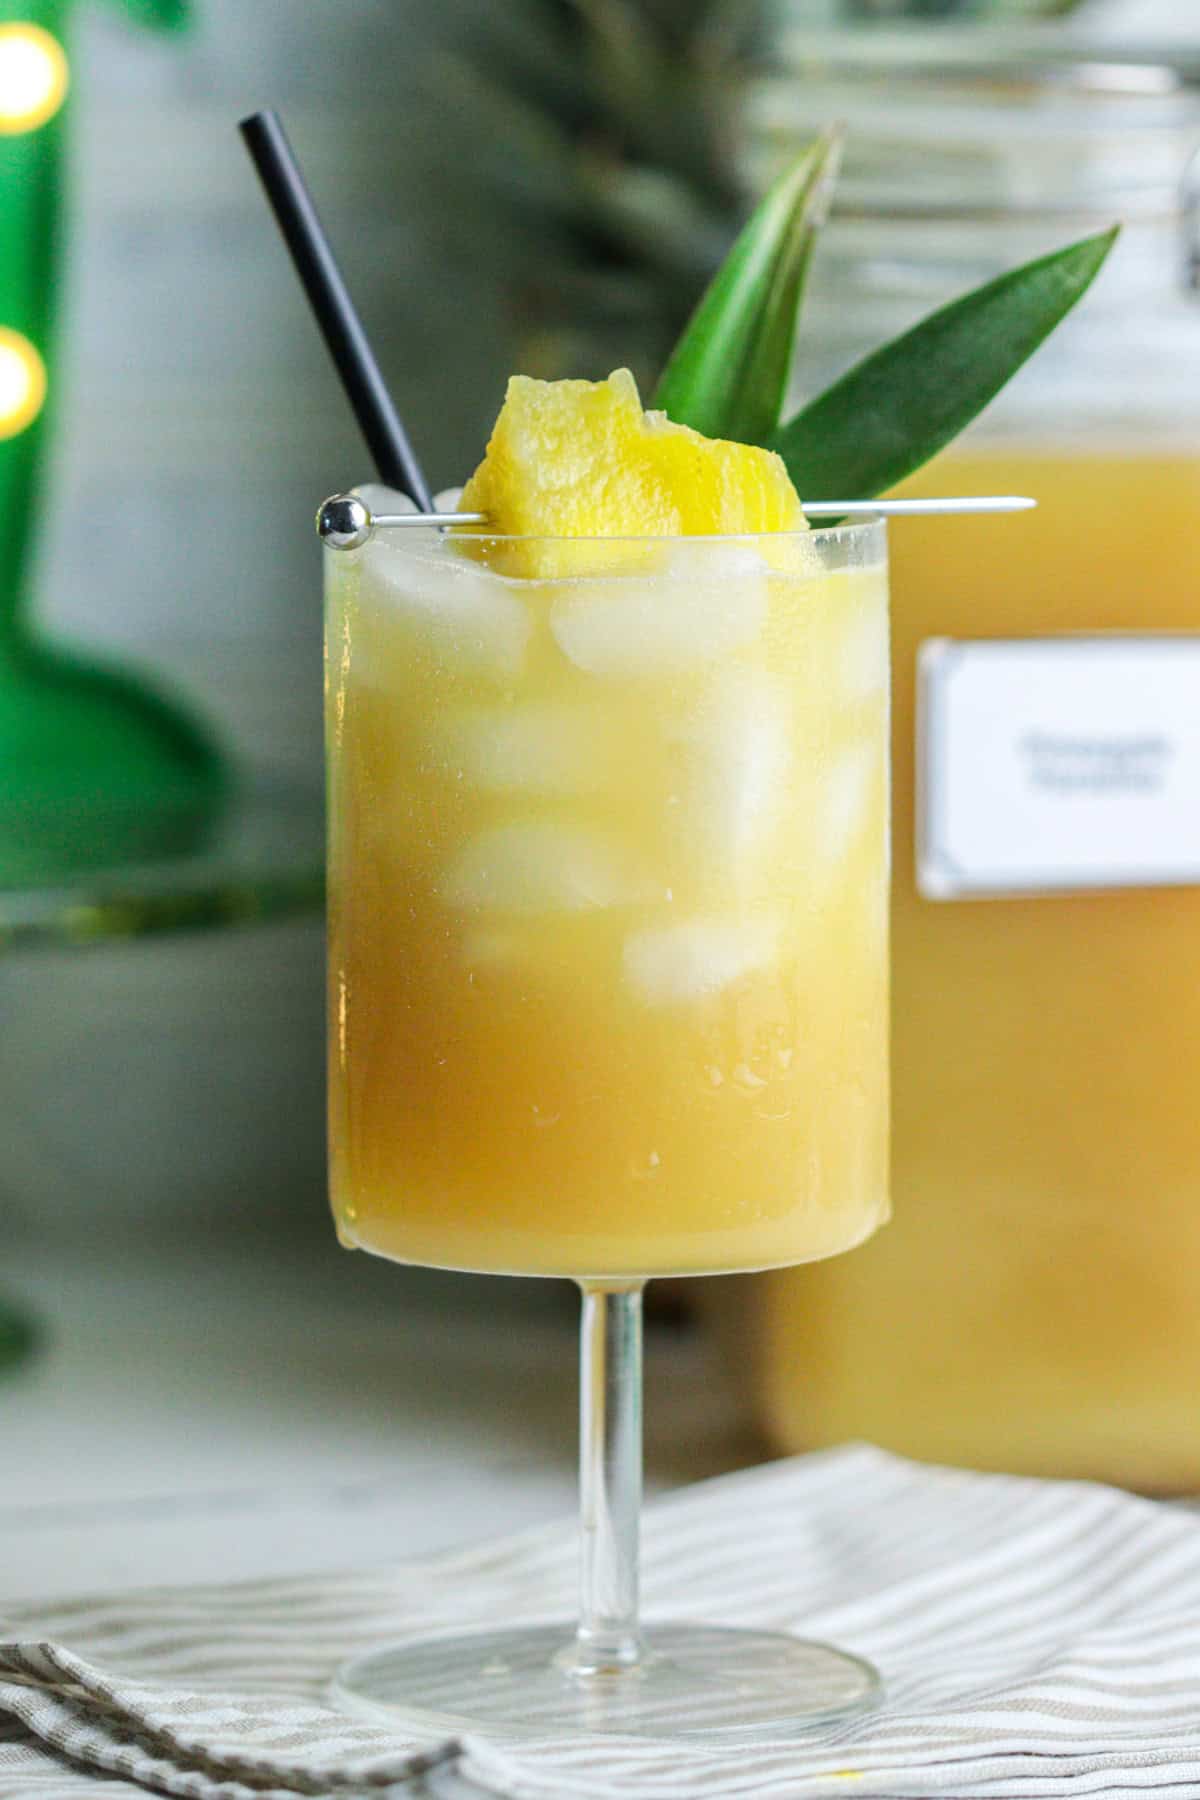 Pineapple coconut cocktail in a glass with garnish.